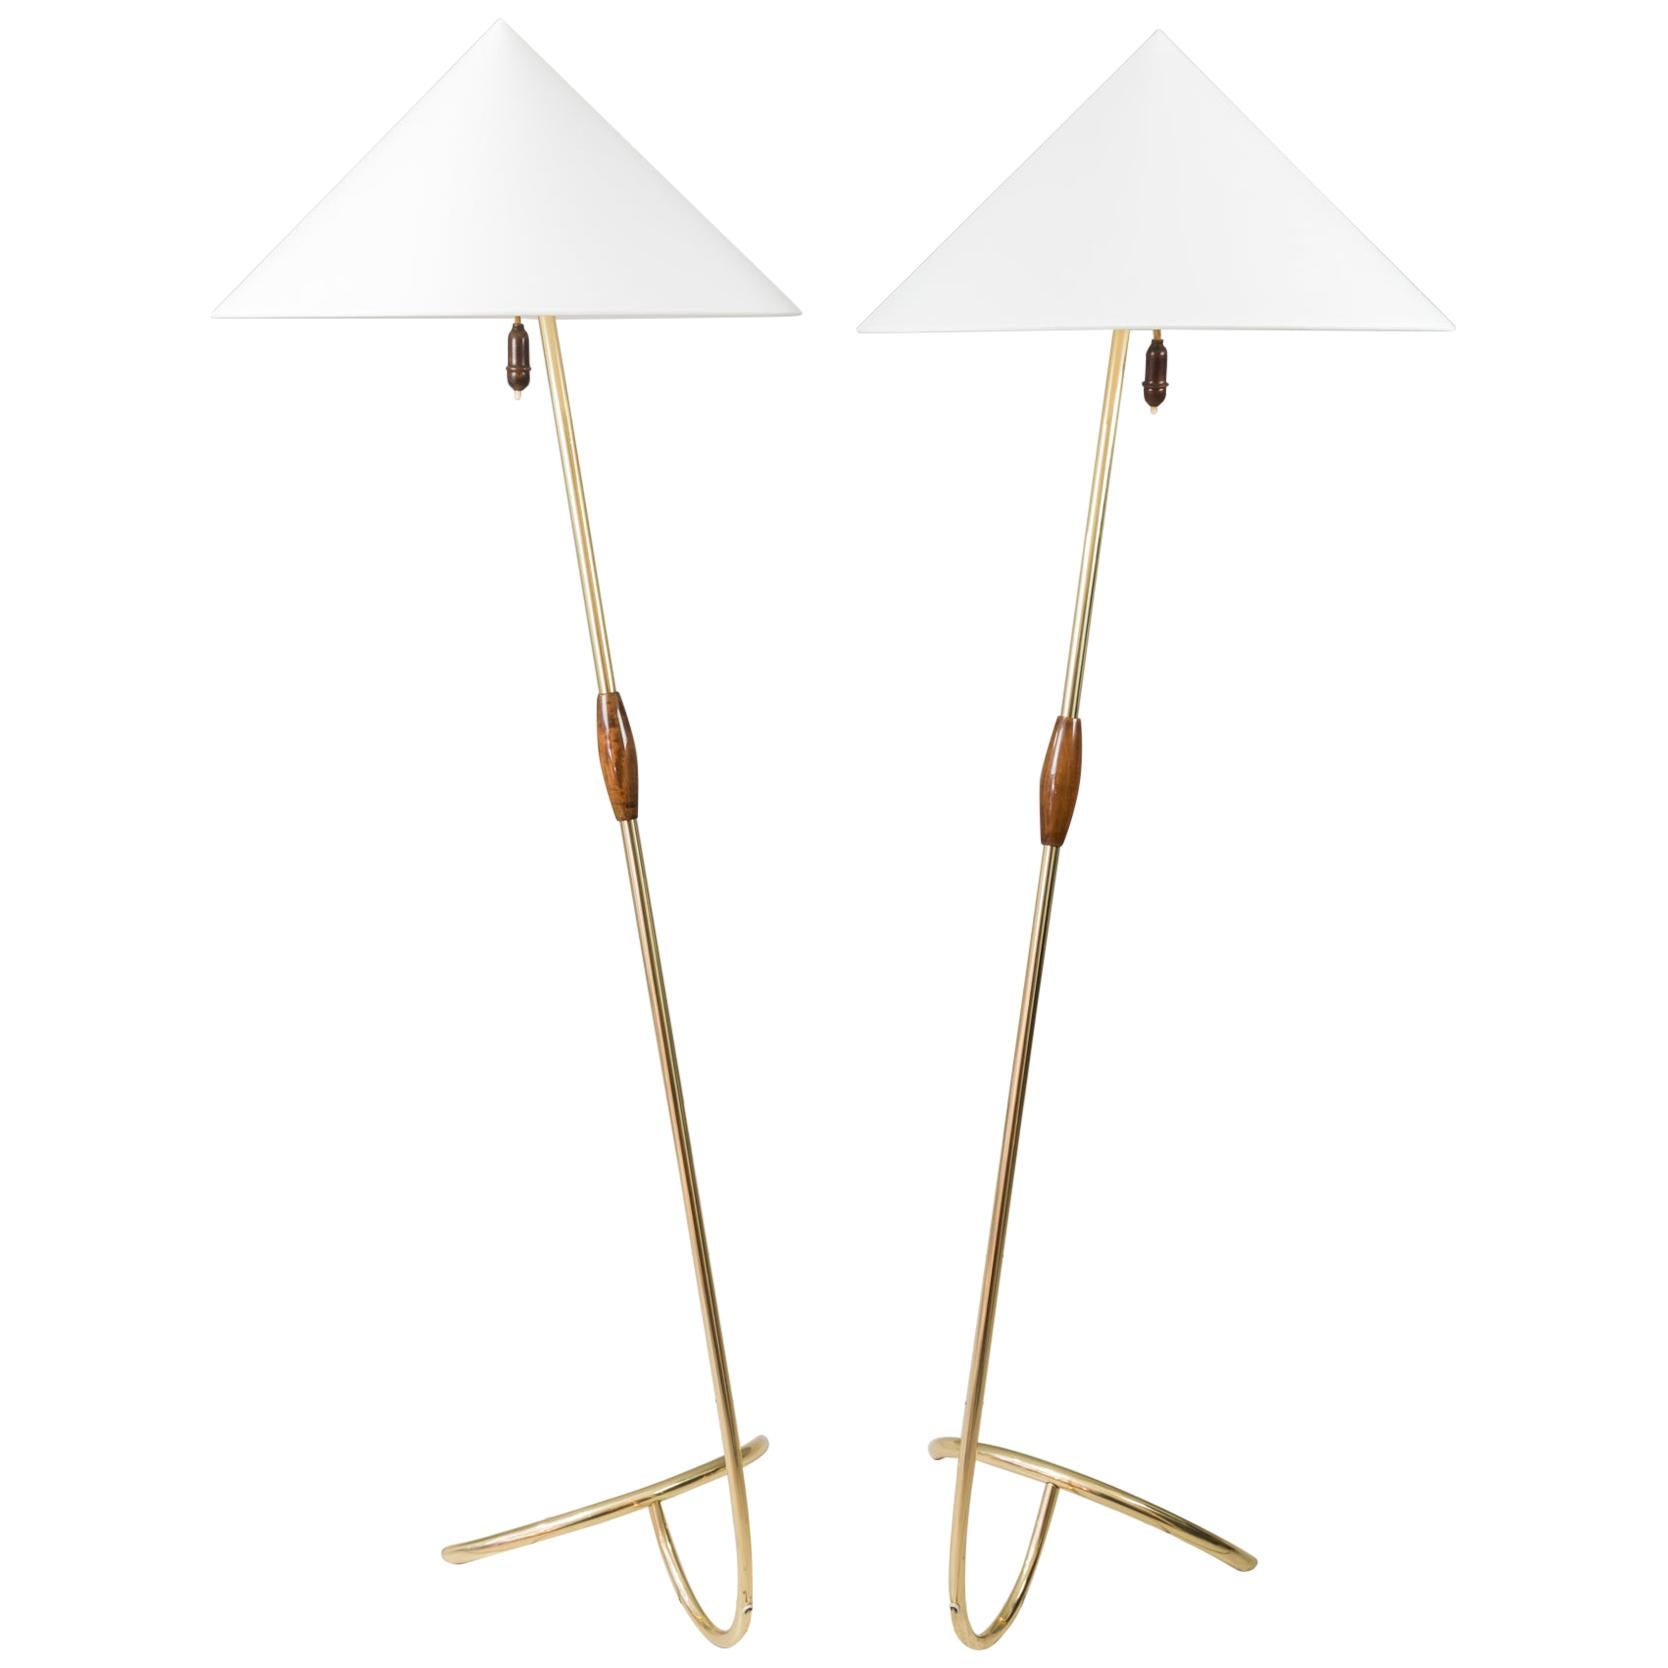 Two Rupert Nikoll Floor Lamps, circa 1950s For Sale